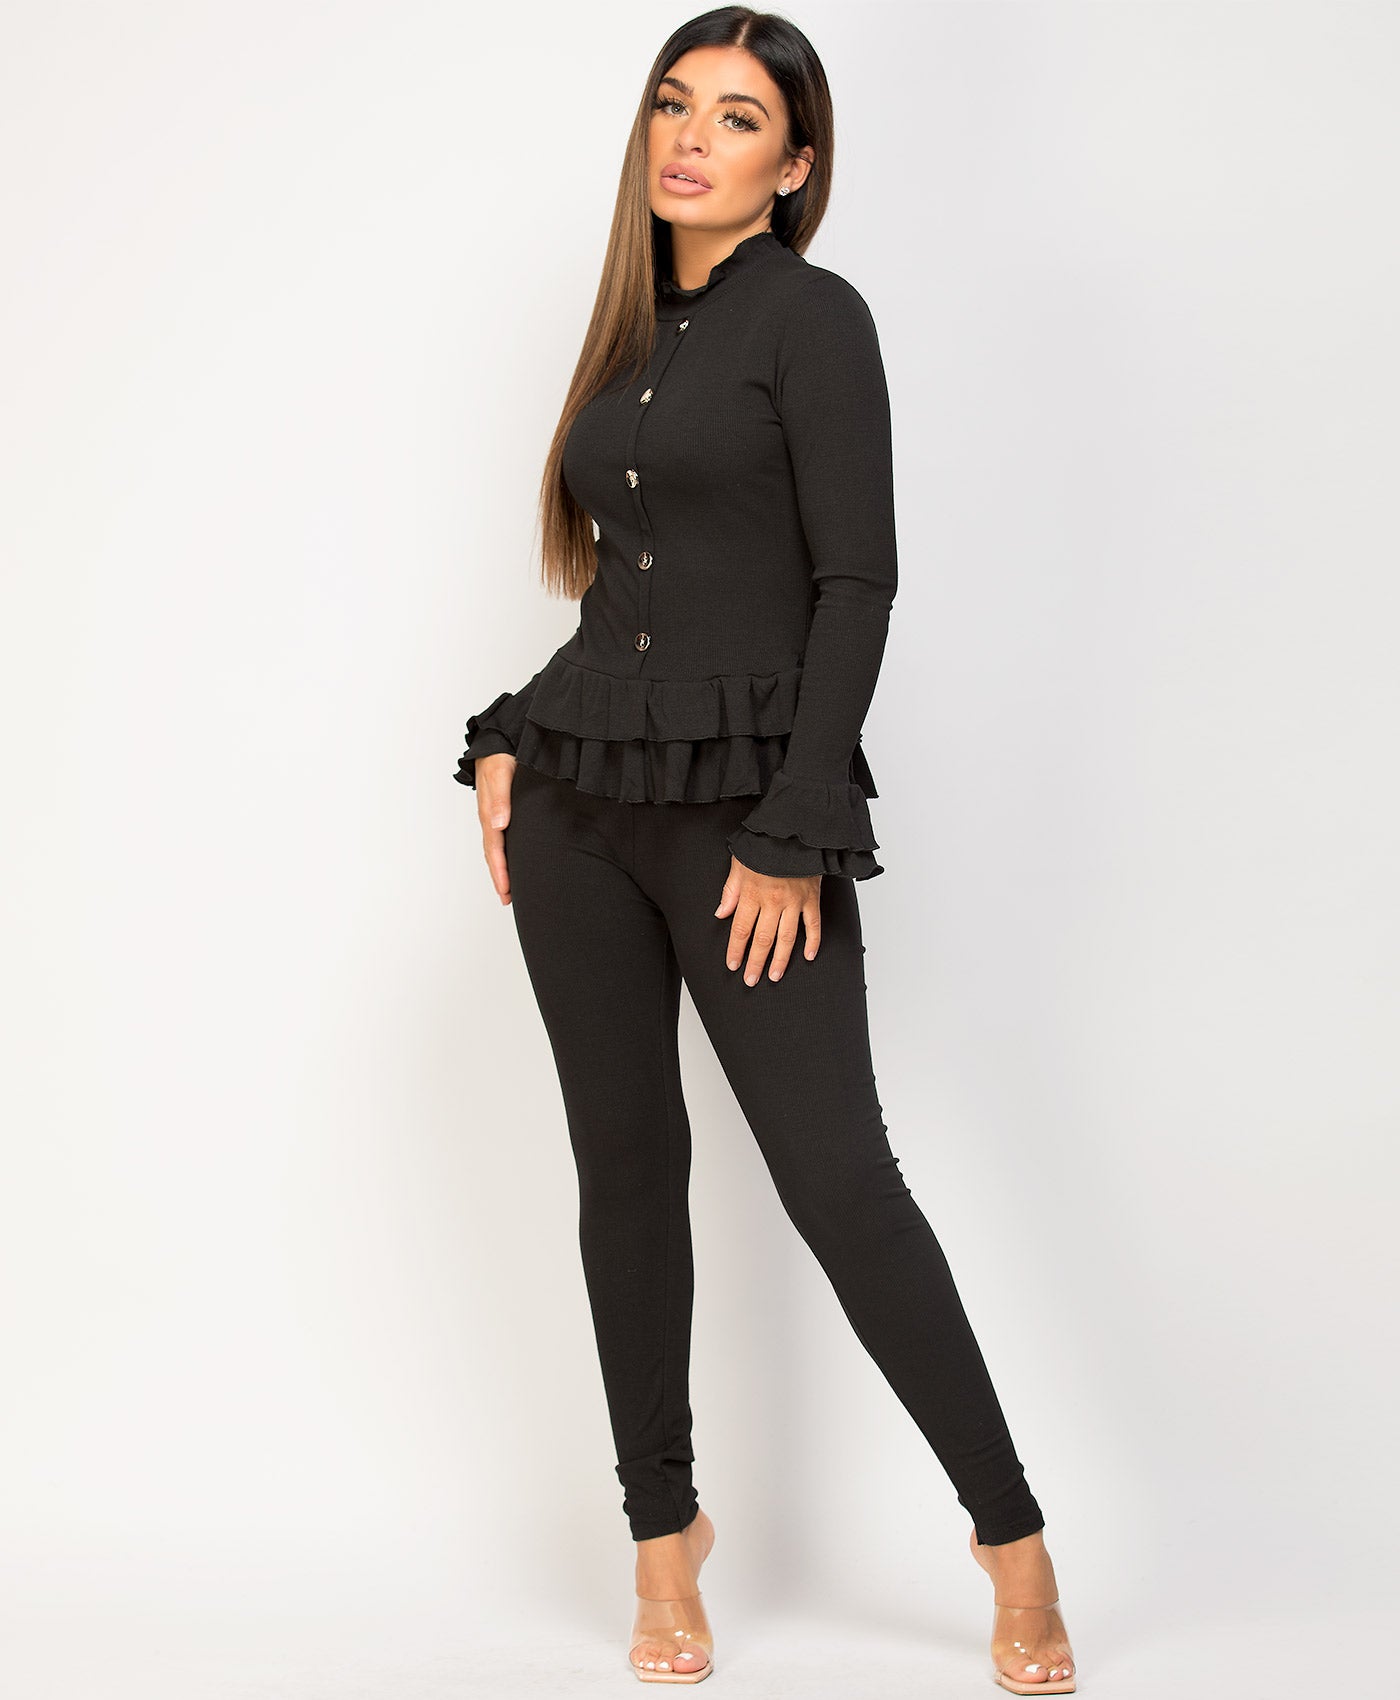 Black-Frill-Gold-Button-Ribbed-Loungewear-Set-4